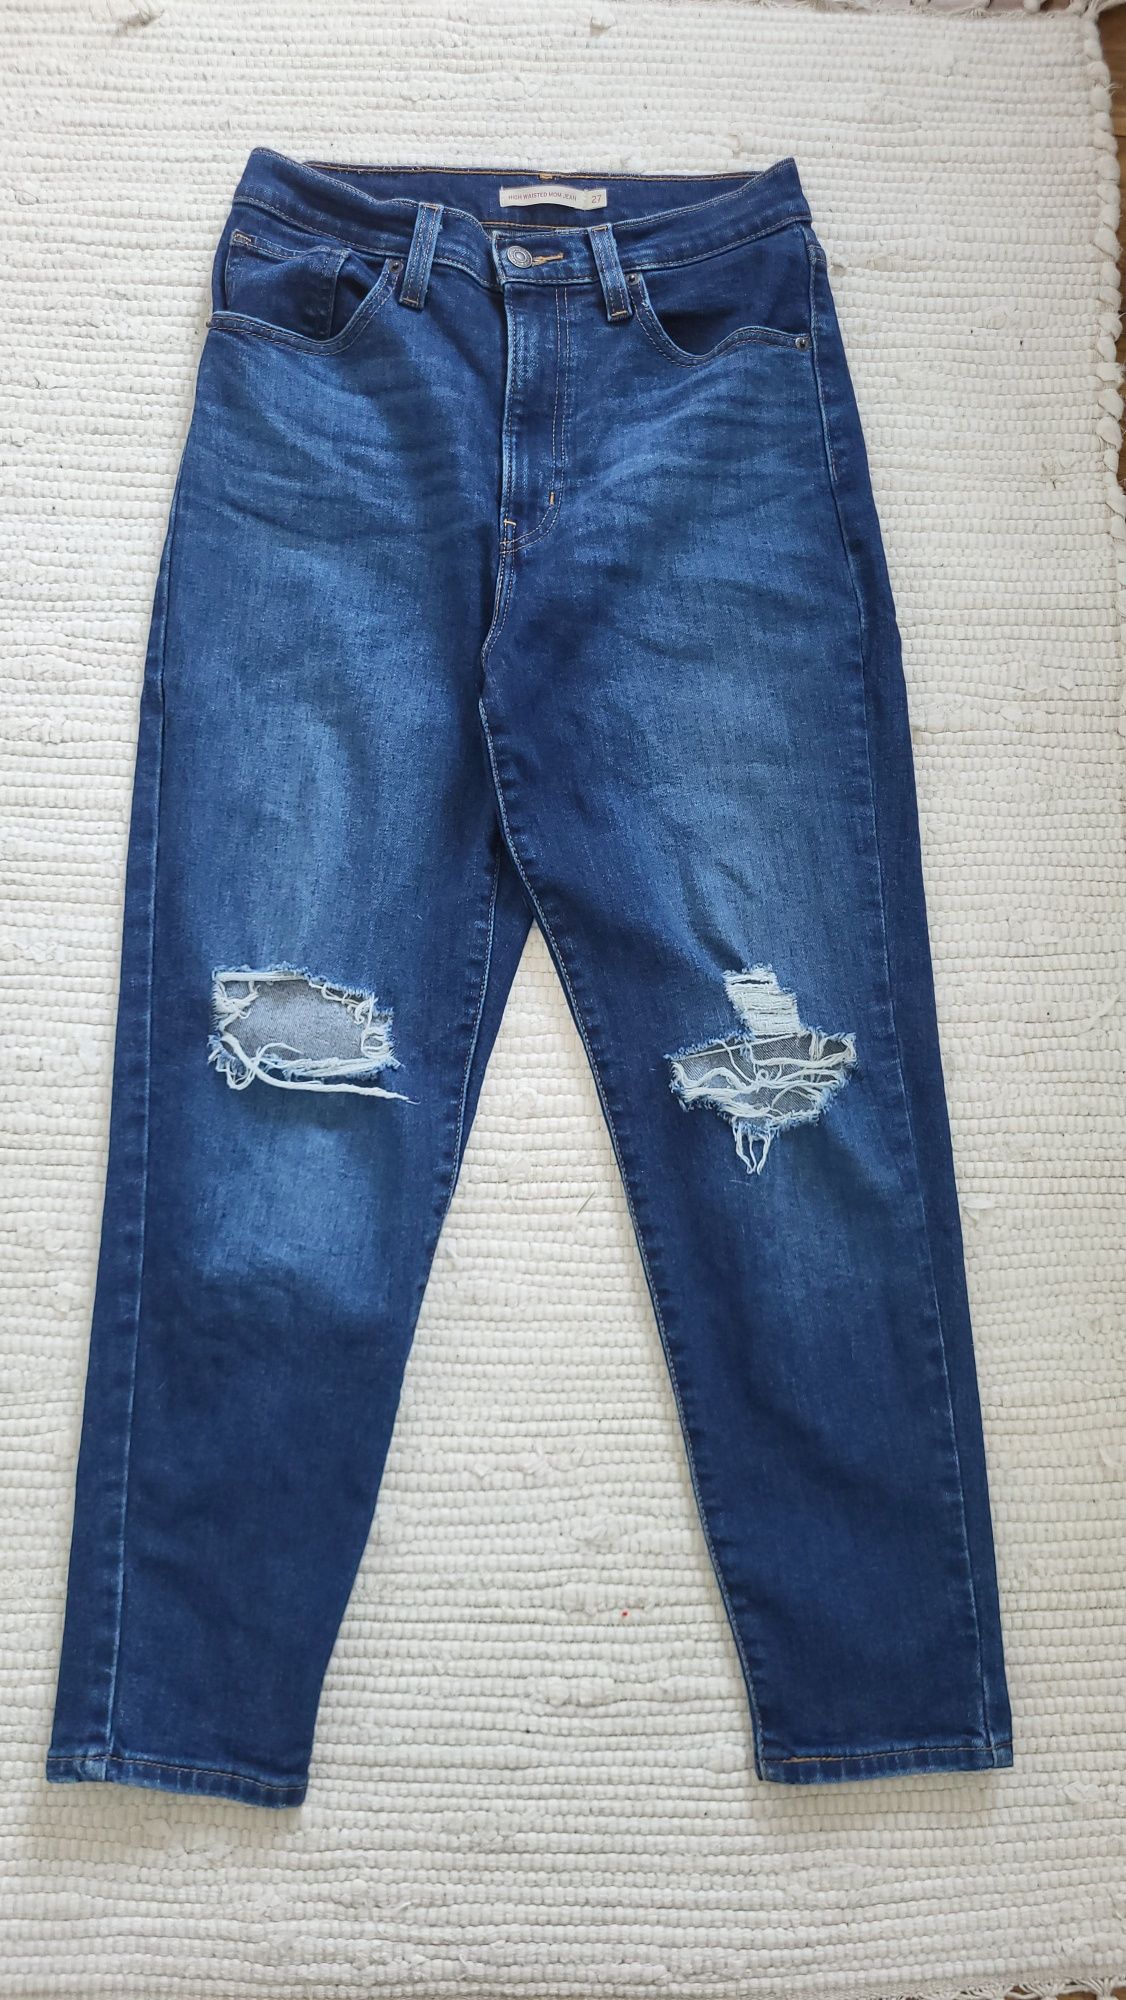 Jeansy Levis High waisted mom, 27/27 bdb